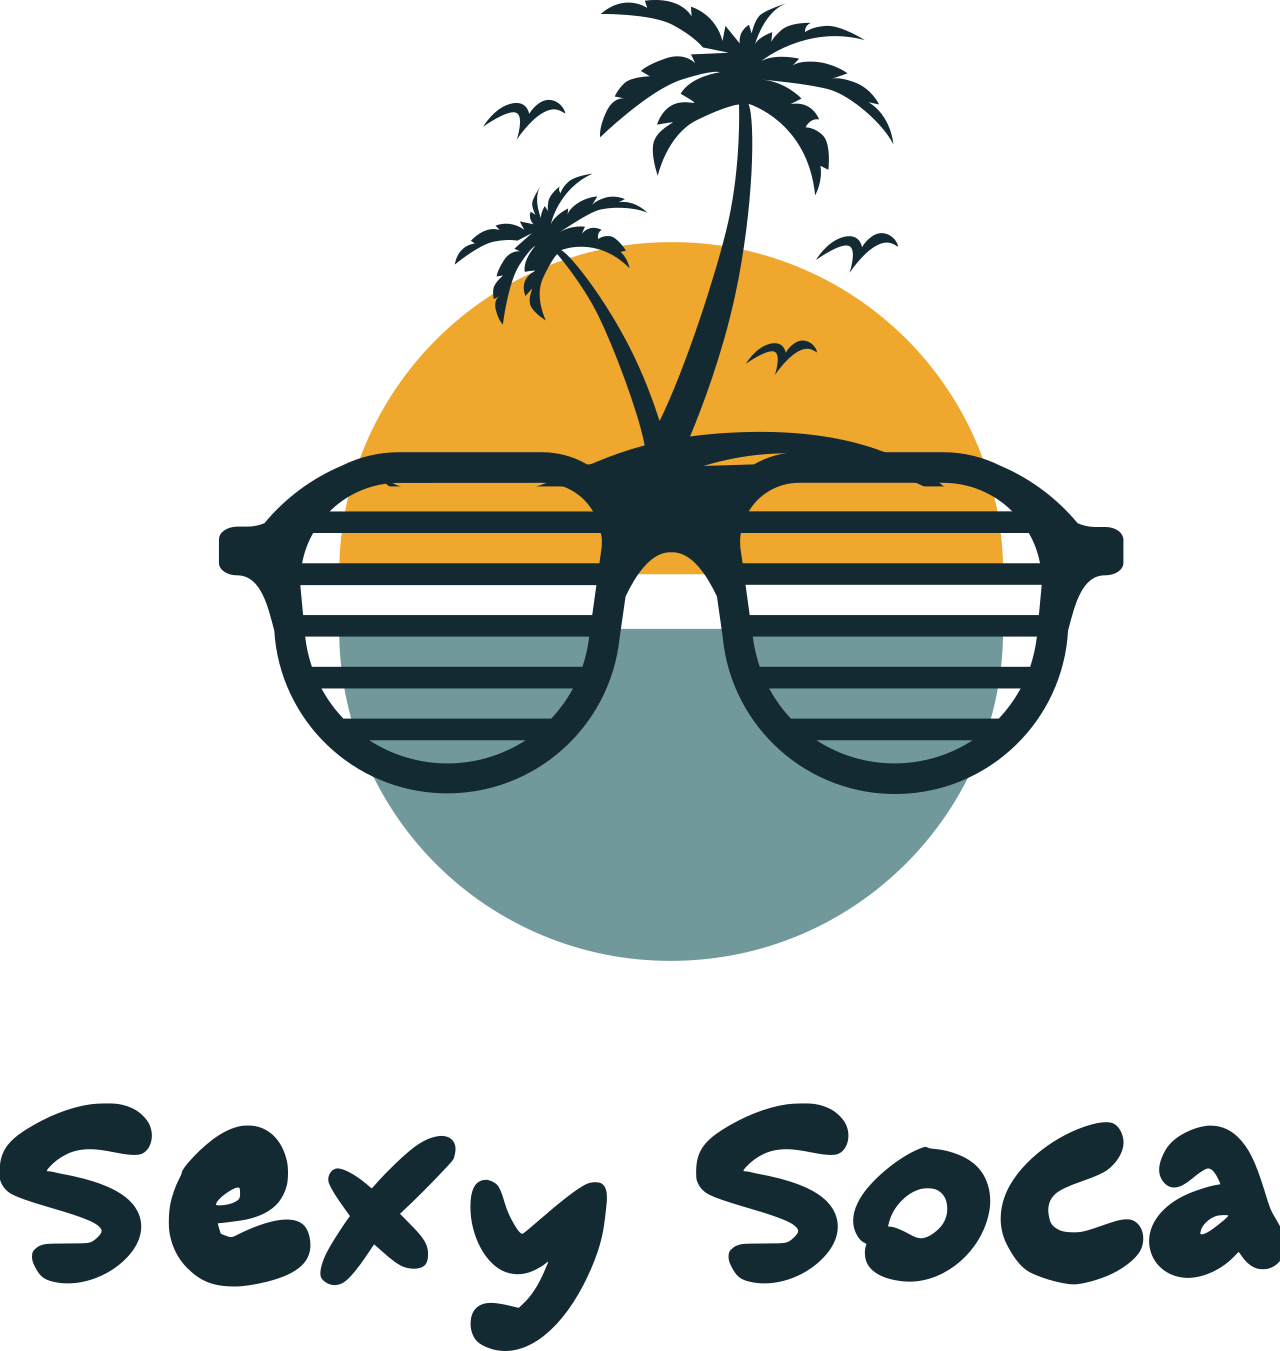 Sexy SoCal's web page